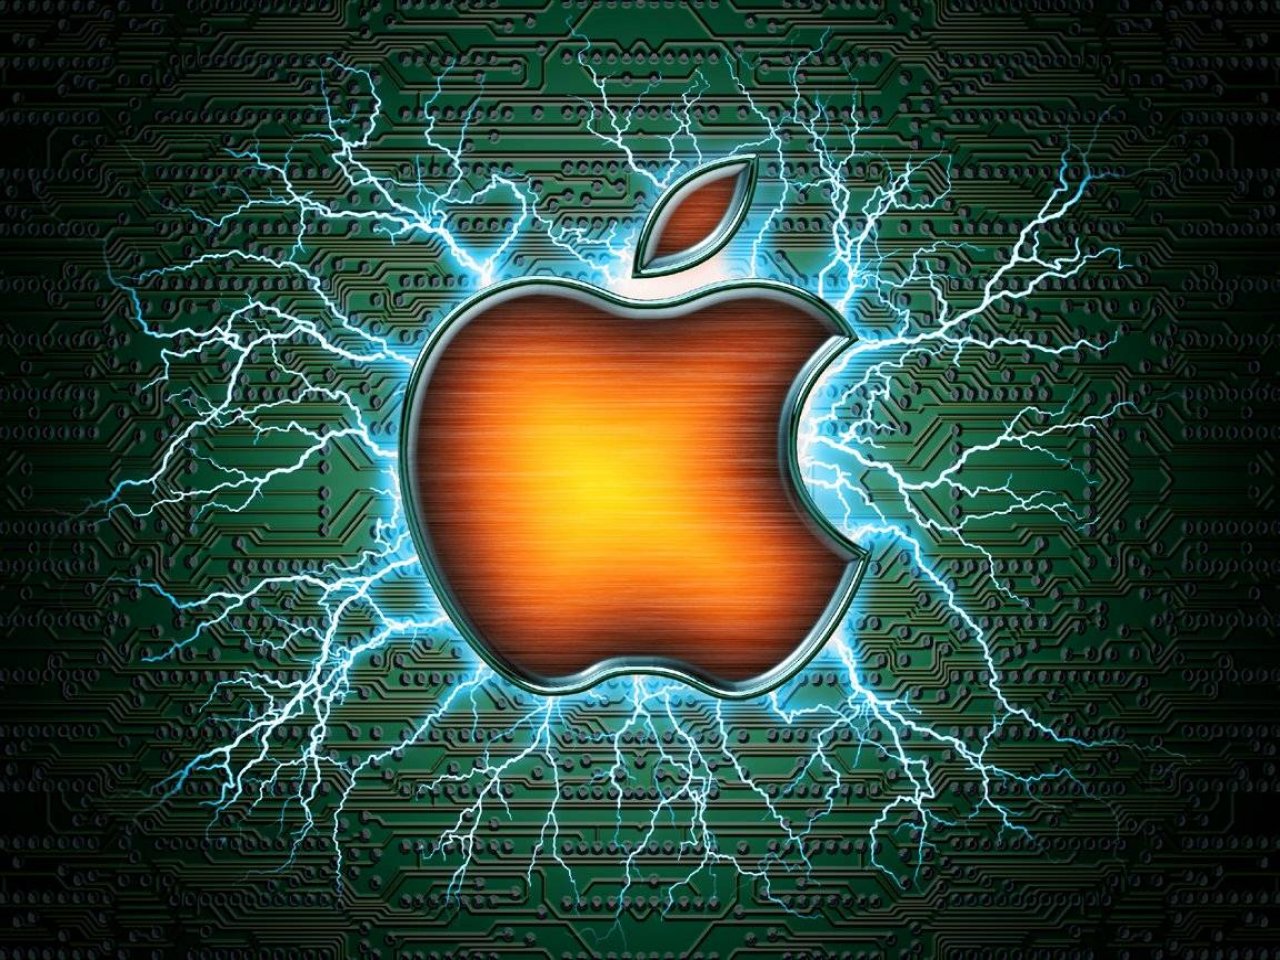 Awesome Apple Background wallpaper 1280x960 22150